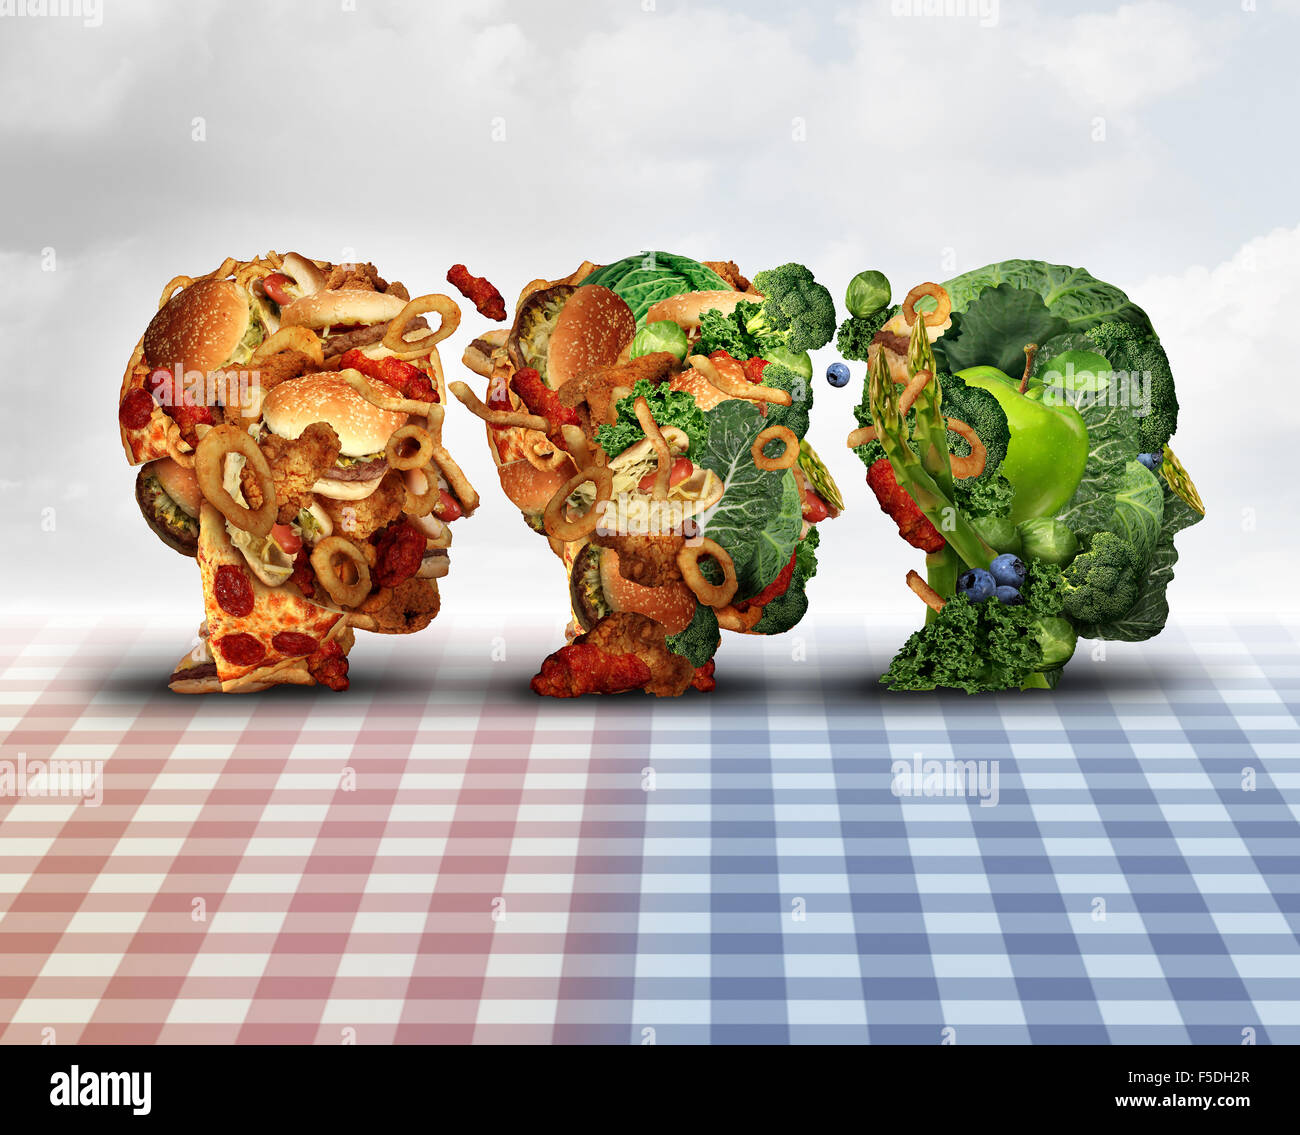 Changing diet healthy lifestyle achievement concept dieting progress change as a healthy lifestyle improvement symbol and evolving from unhealthy junk food to fresh fruits and vegetables shaped as a human head. Stock Photo